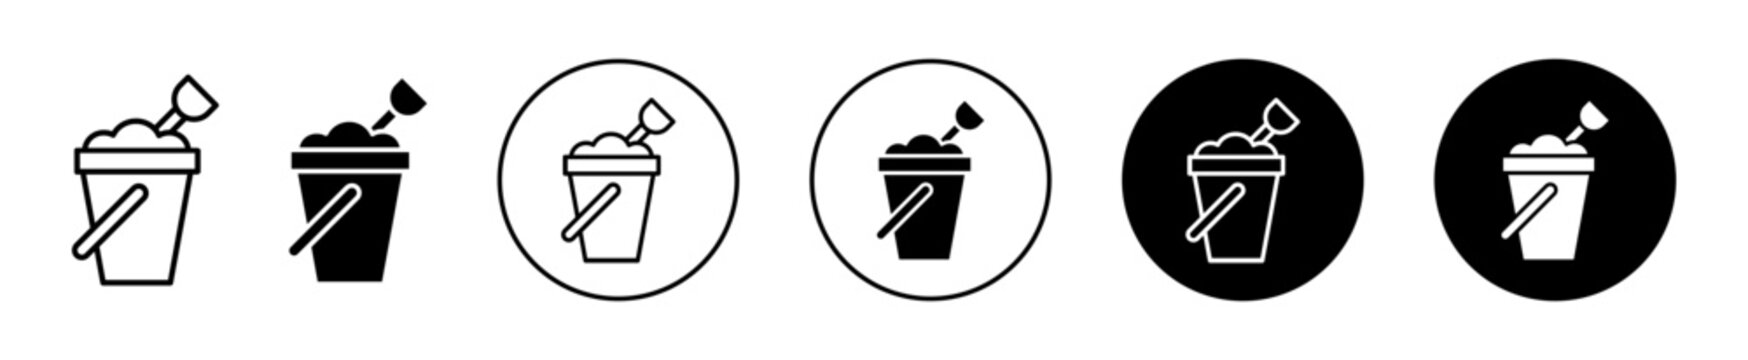 Sand bucket icon. dummy sand filled bucket for emergency in building symbol vector sign set. 